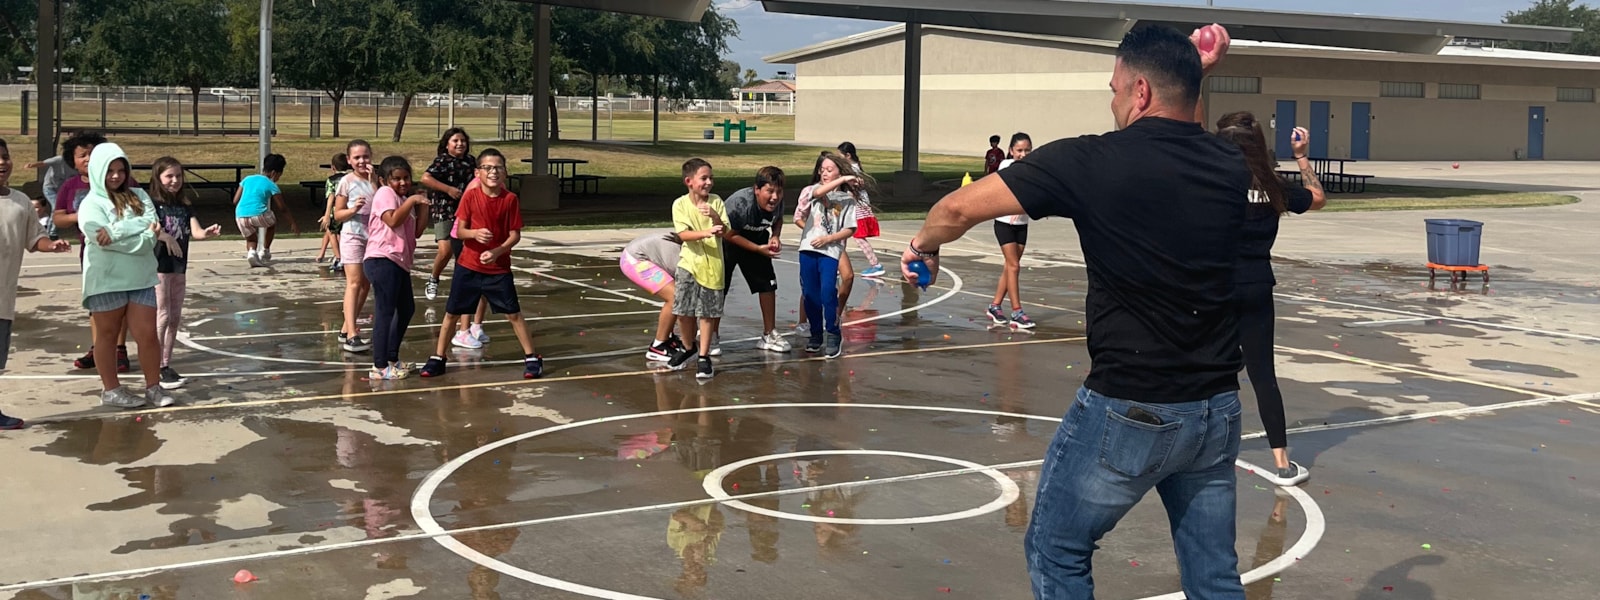 Assistant Principal throwing water balloons with 3rd grade class.